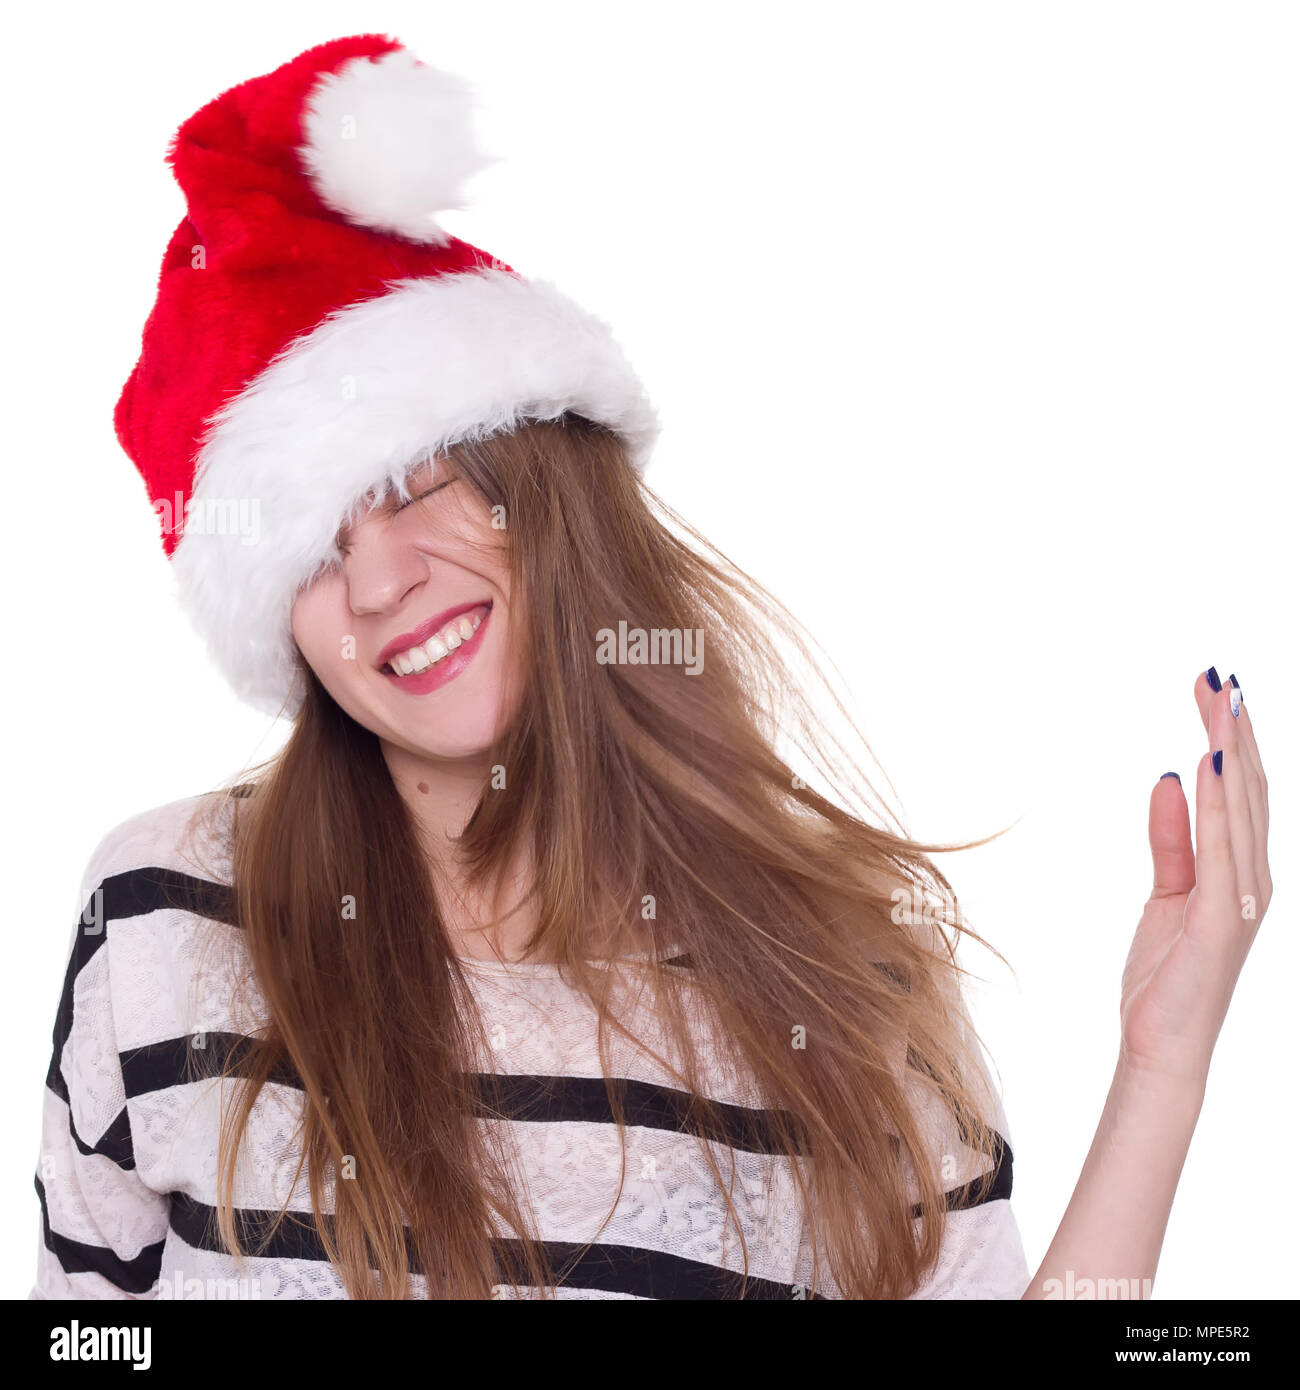 Expressive emotional girl in a Christmas hat on a white background. isolate Stock Photo